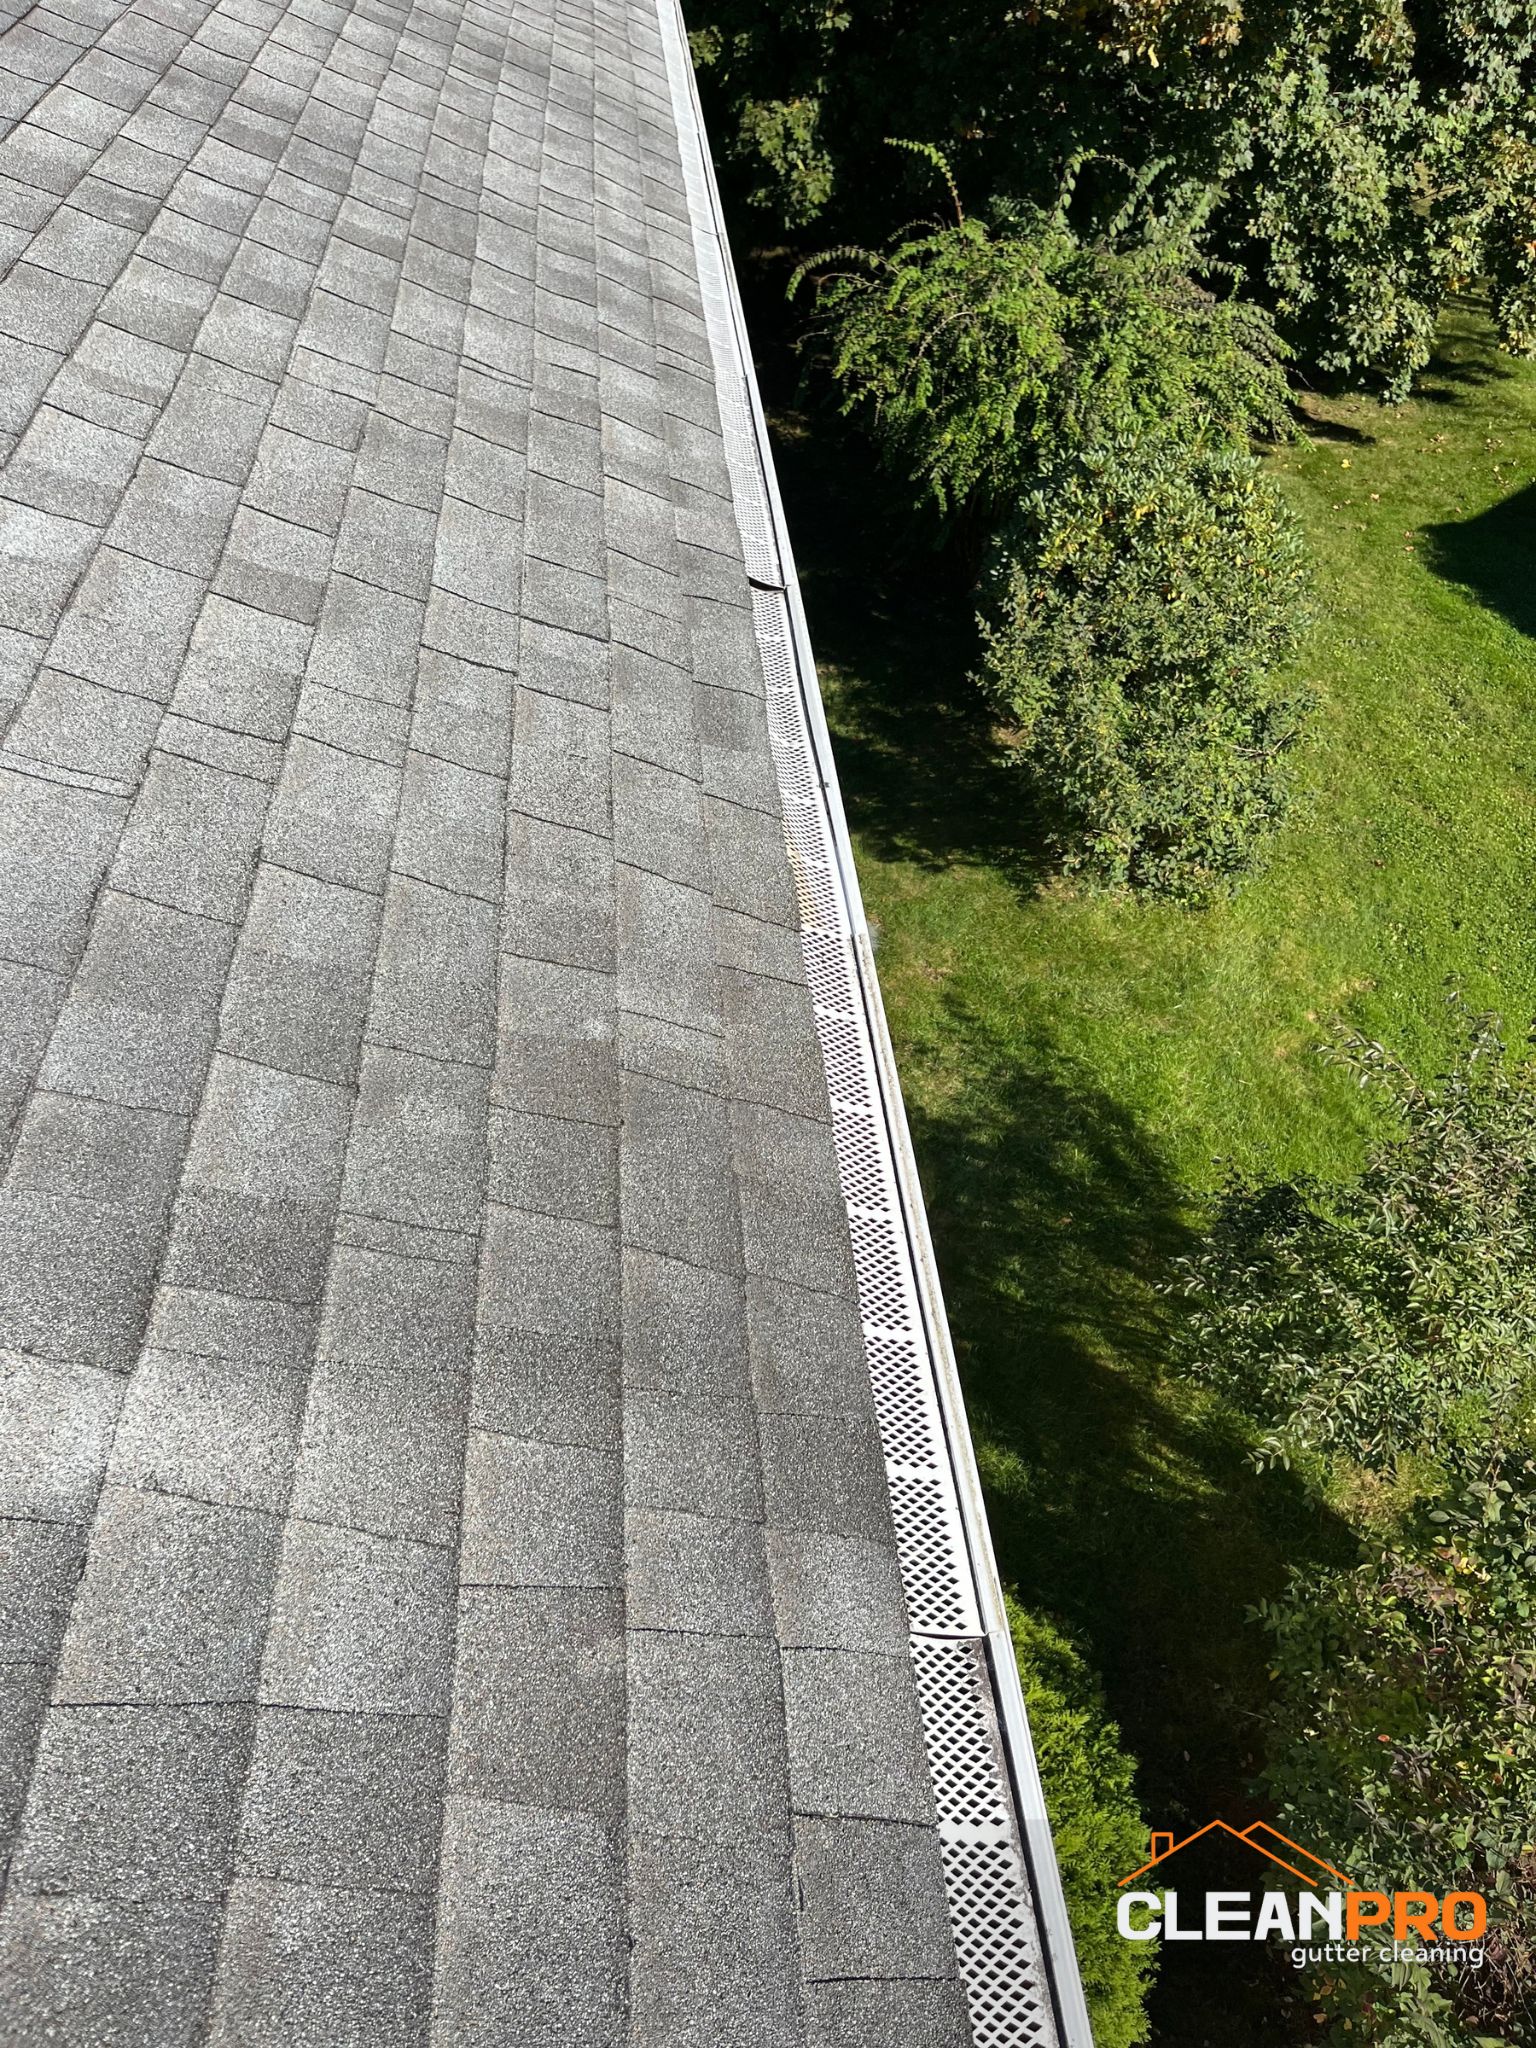 Residential Gutter Cleaning in Houston TX